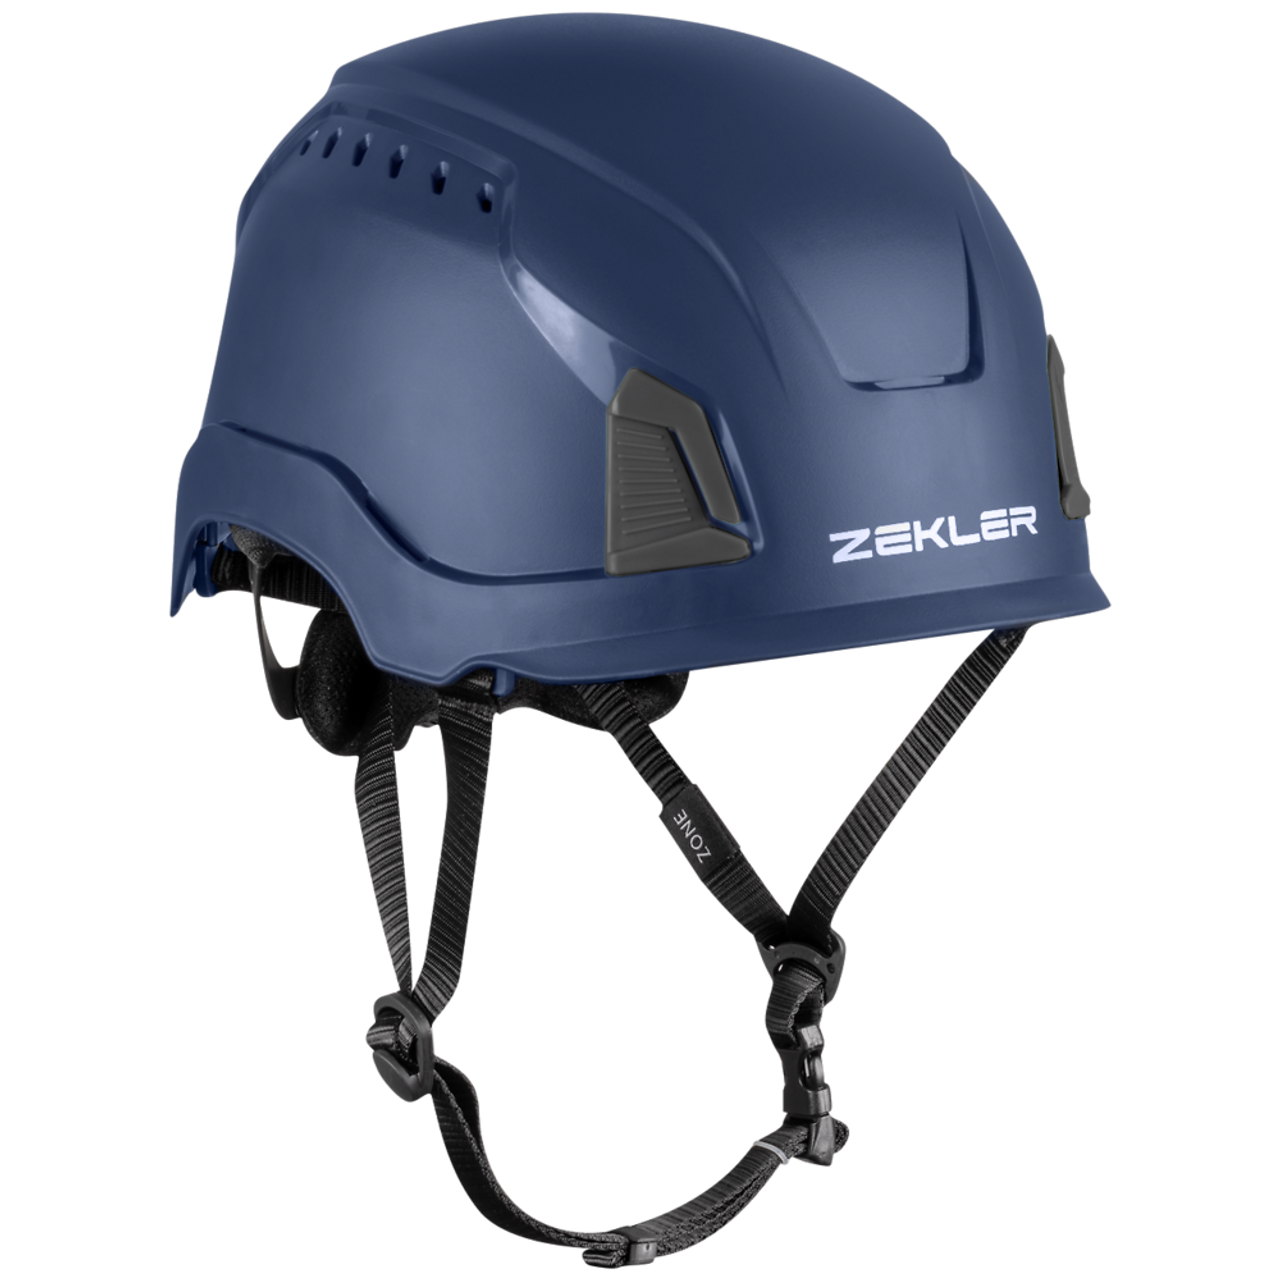 ZEKLER Helmet | Where to buy ZONE Standard Blue Technical Safety Helmet  with Chinstraps, Rope Access, Electricians, Construction, Workshops and Machinery Operators